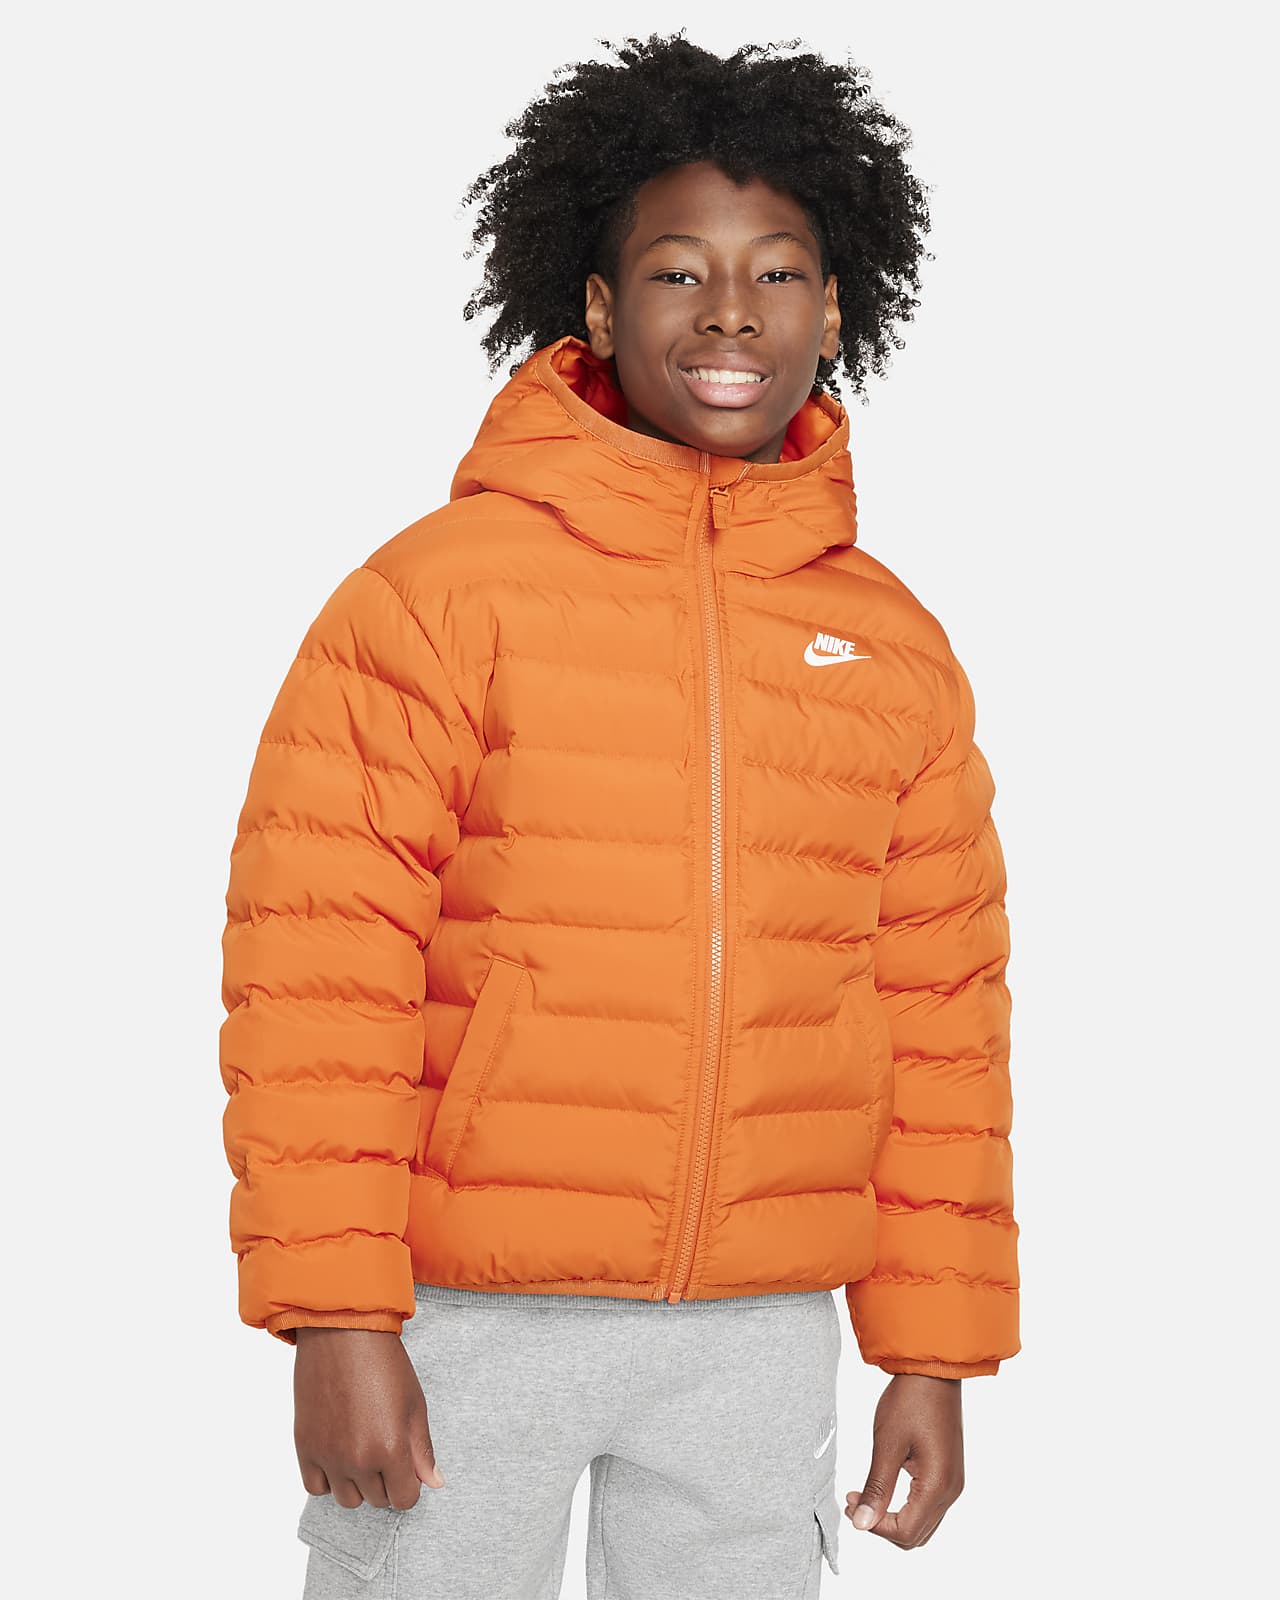 Boys' Puffer Jackets, Explore our New Arrivals